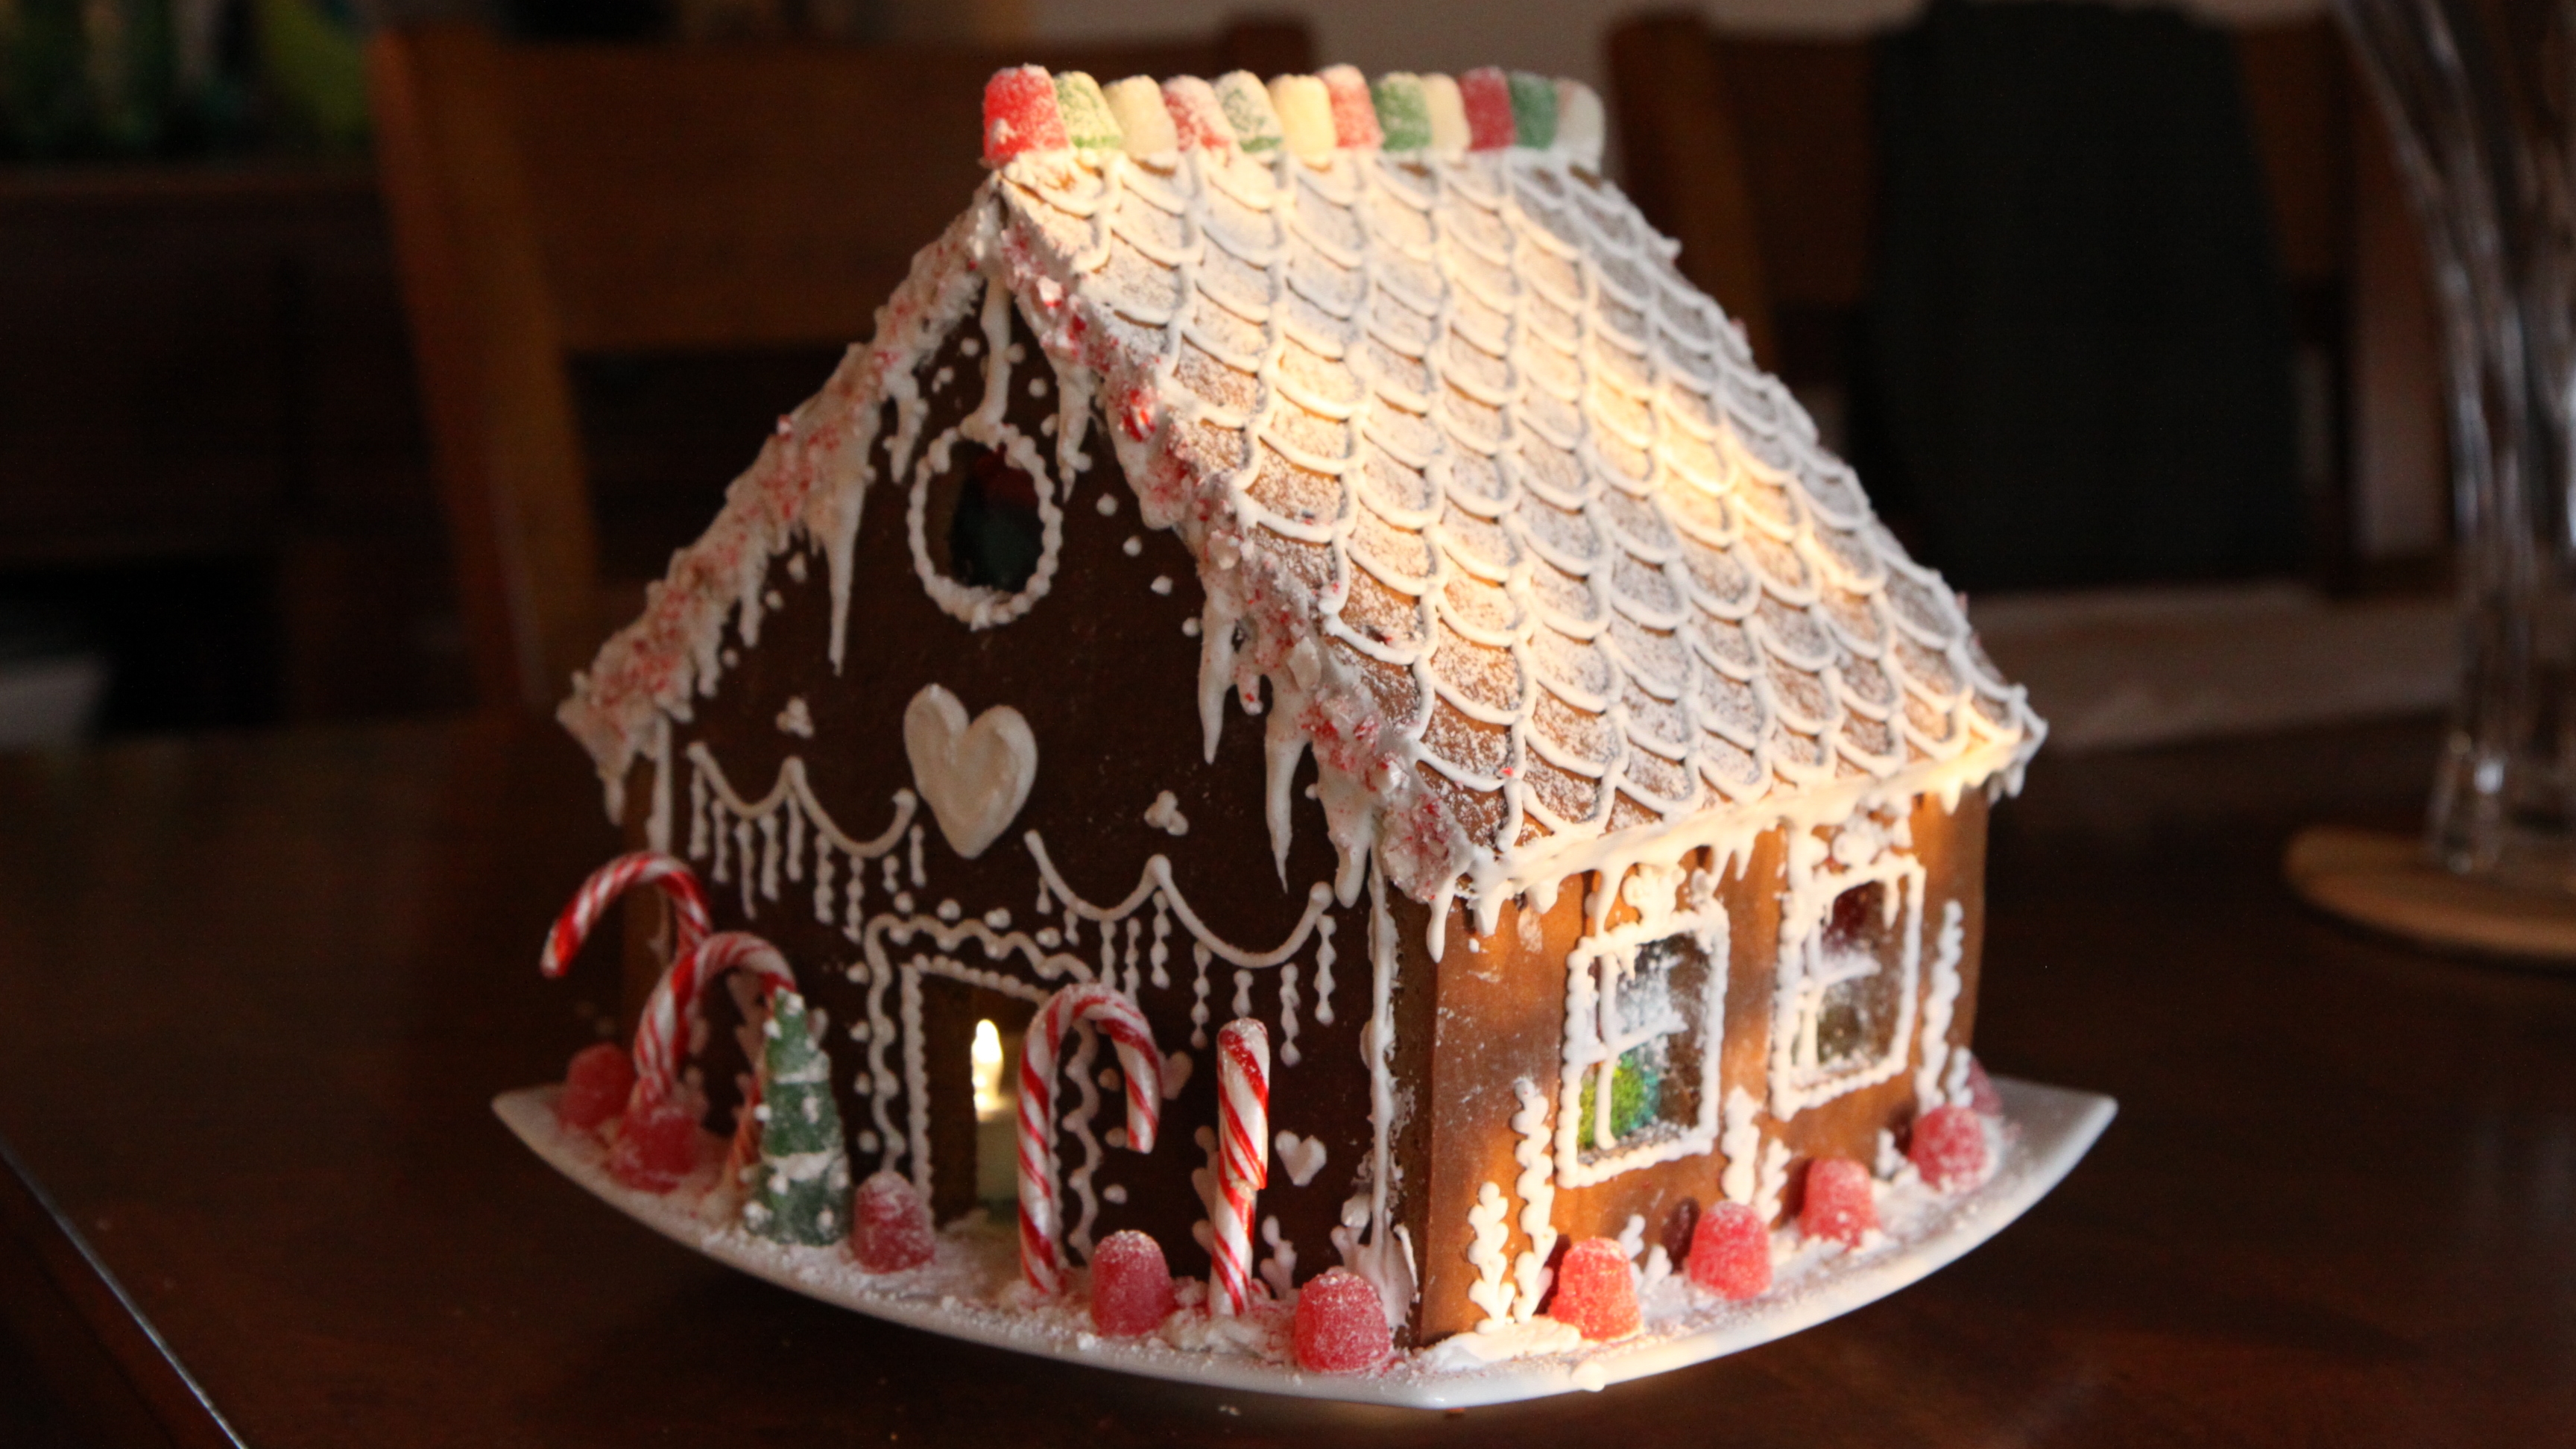 A four-day gingerbread house